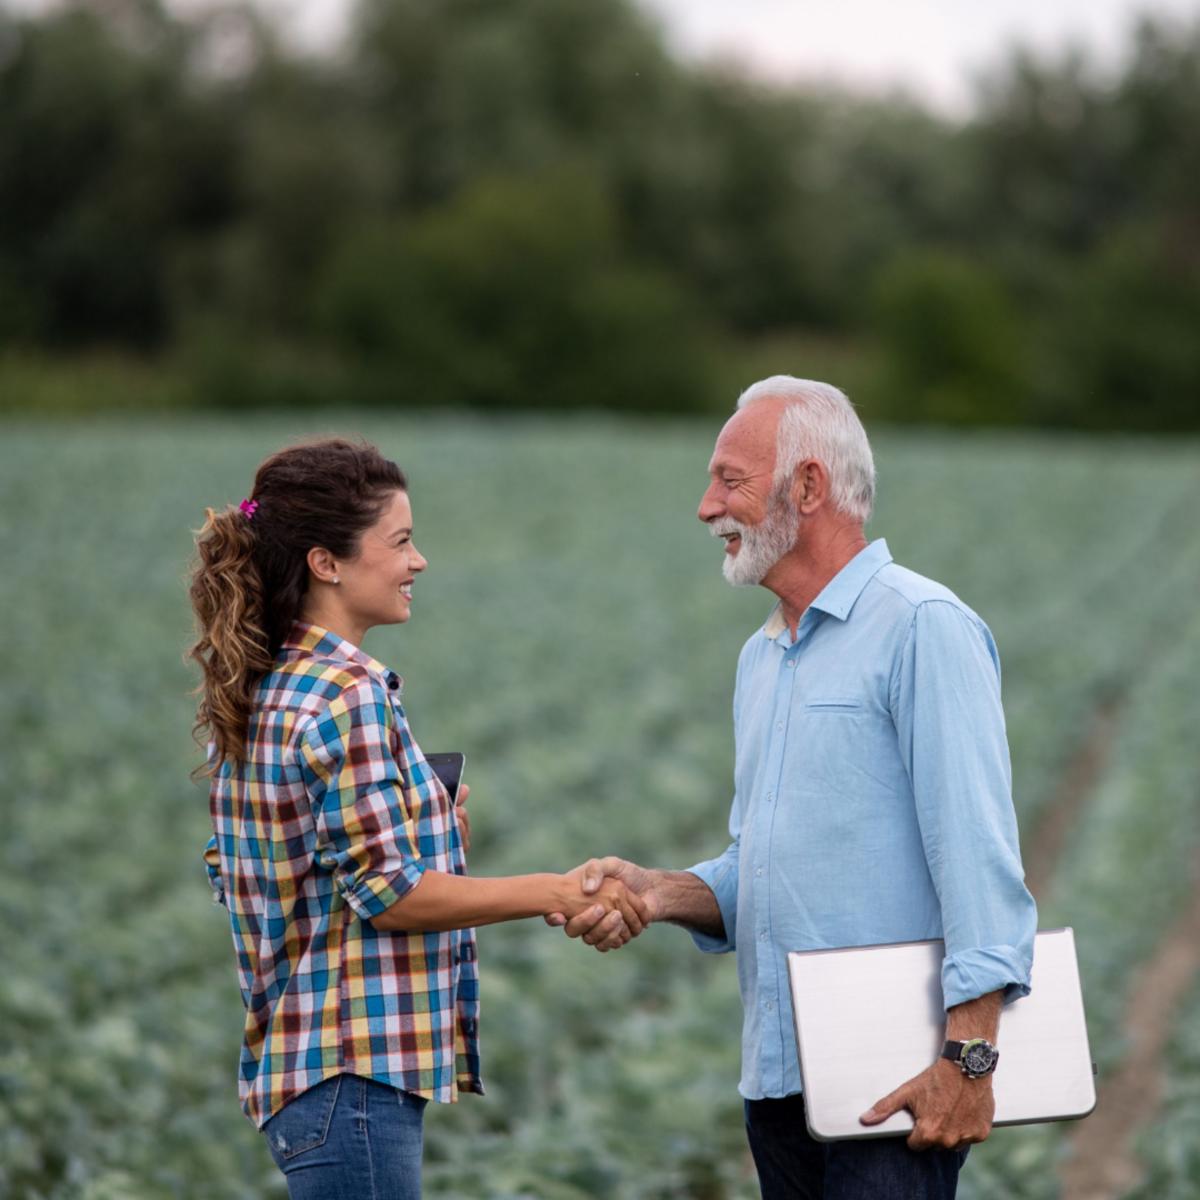 A man and a woman shaking hands in a field of crops.